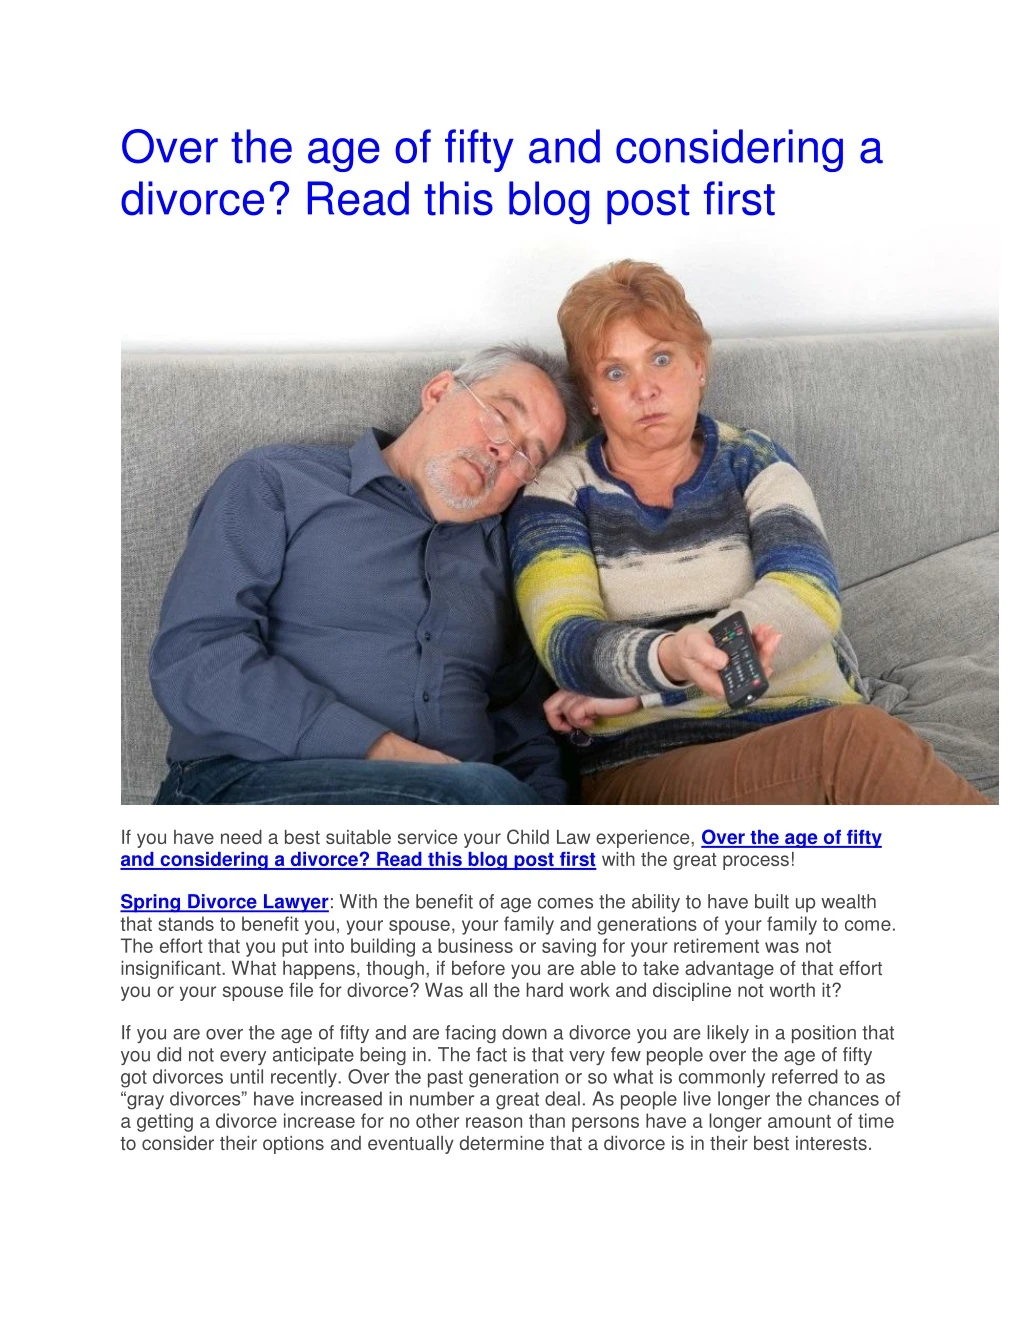 over the age of fifty and considering a divorce